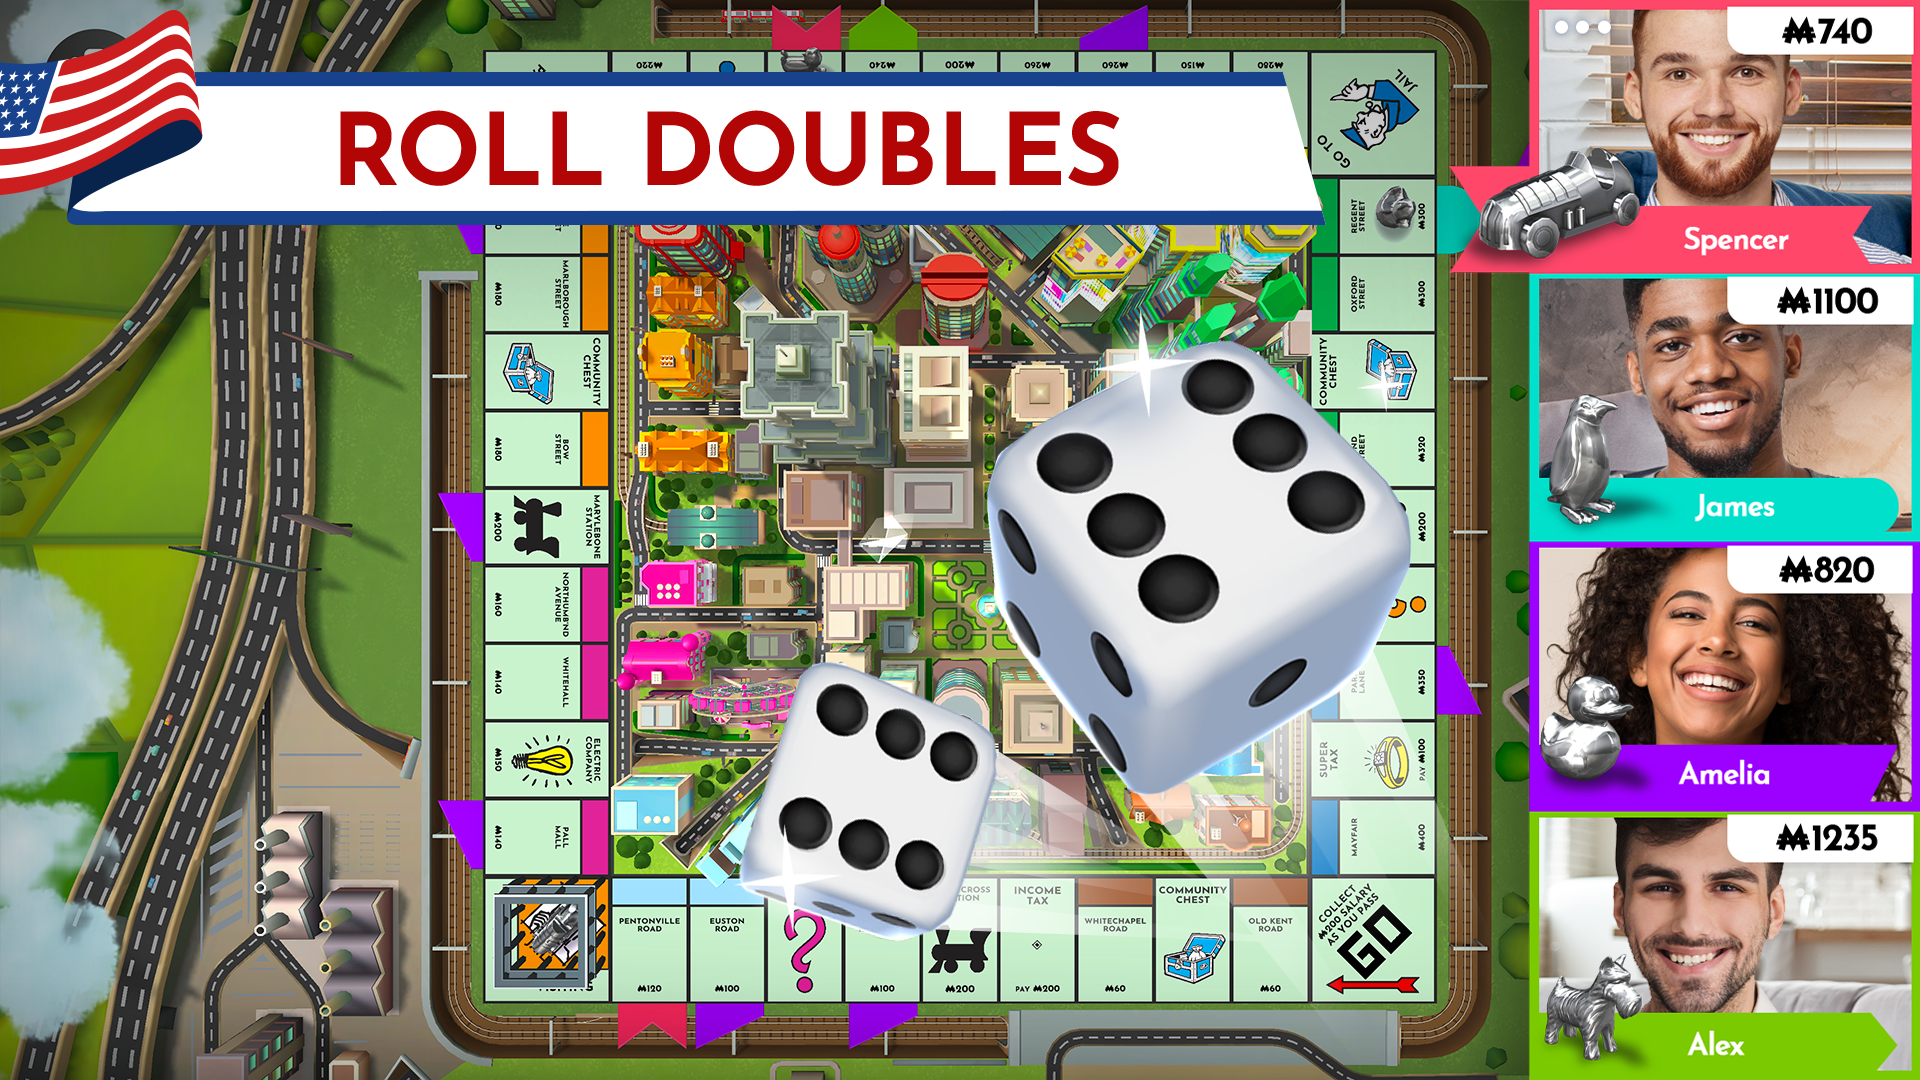 Download & Play Monopoly on PC with Free Emulator